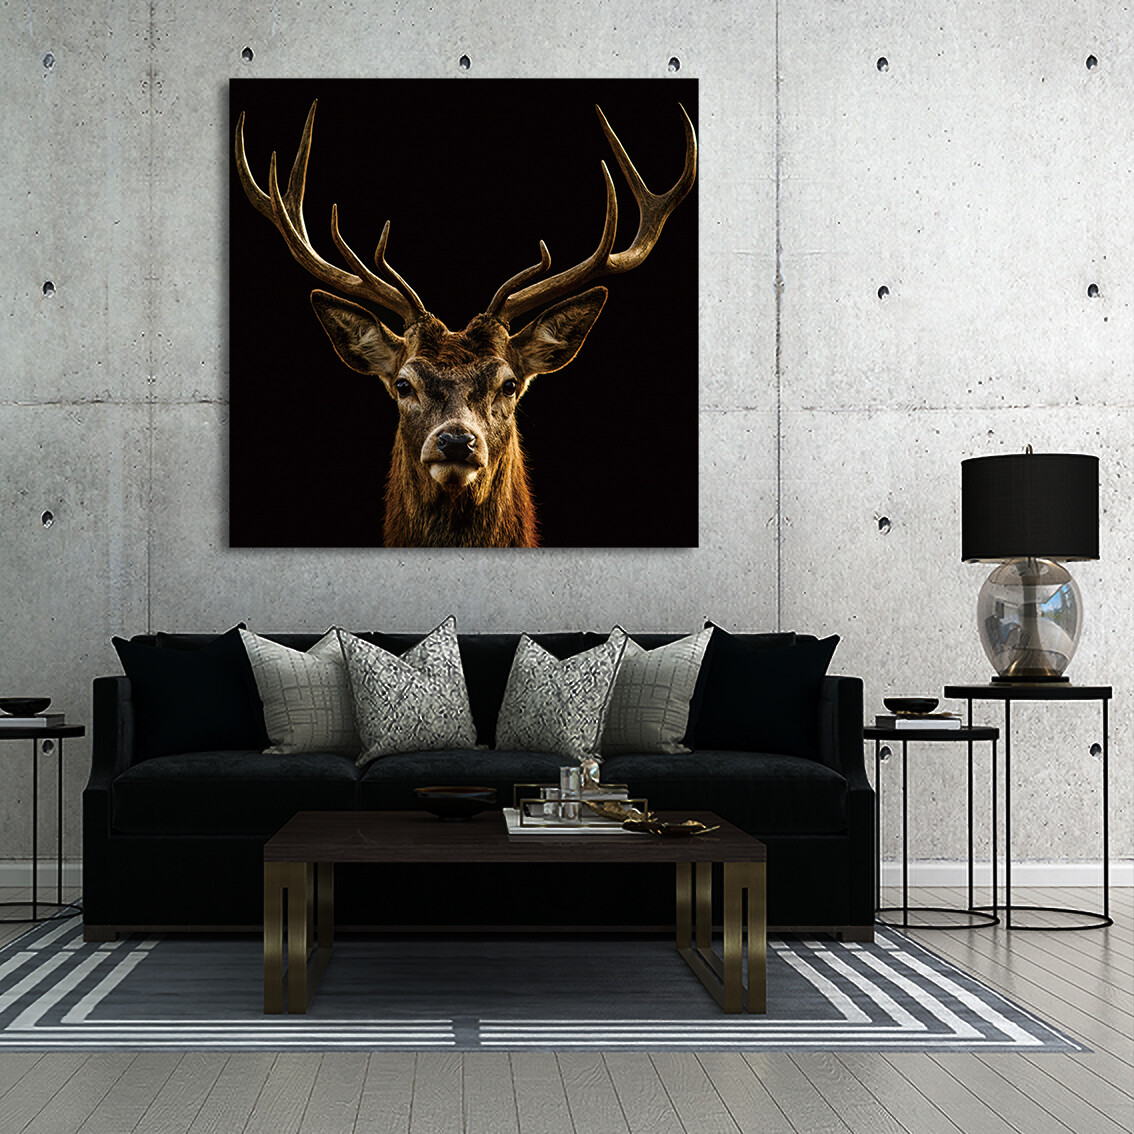 Red Deer - Modern Luxury Wall art Printed on Acrylic Glass - Frameless and Ready to Hang